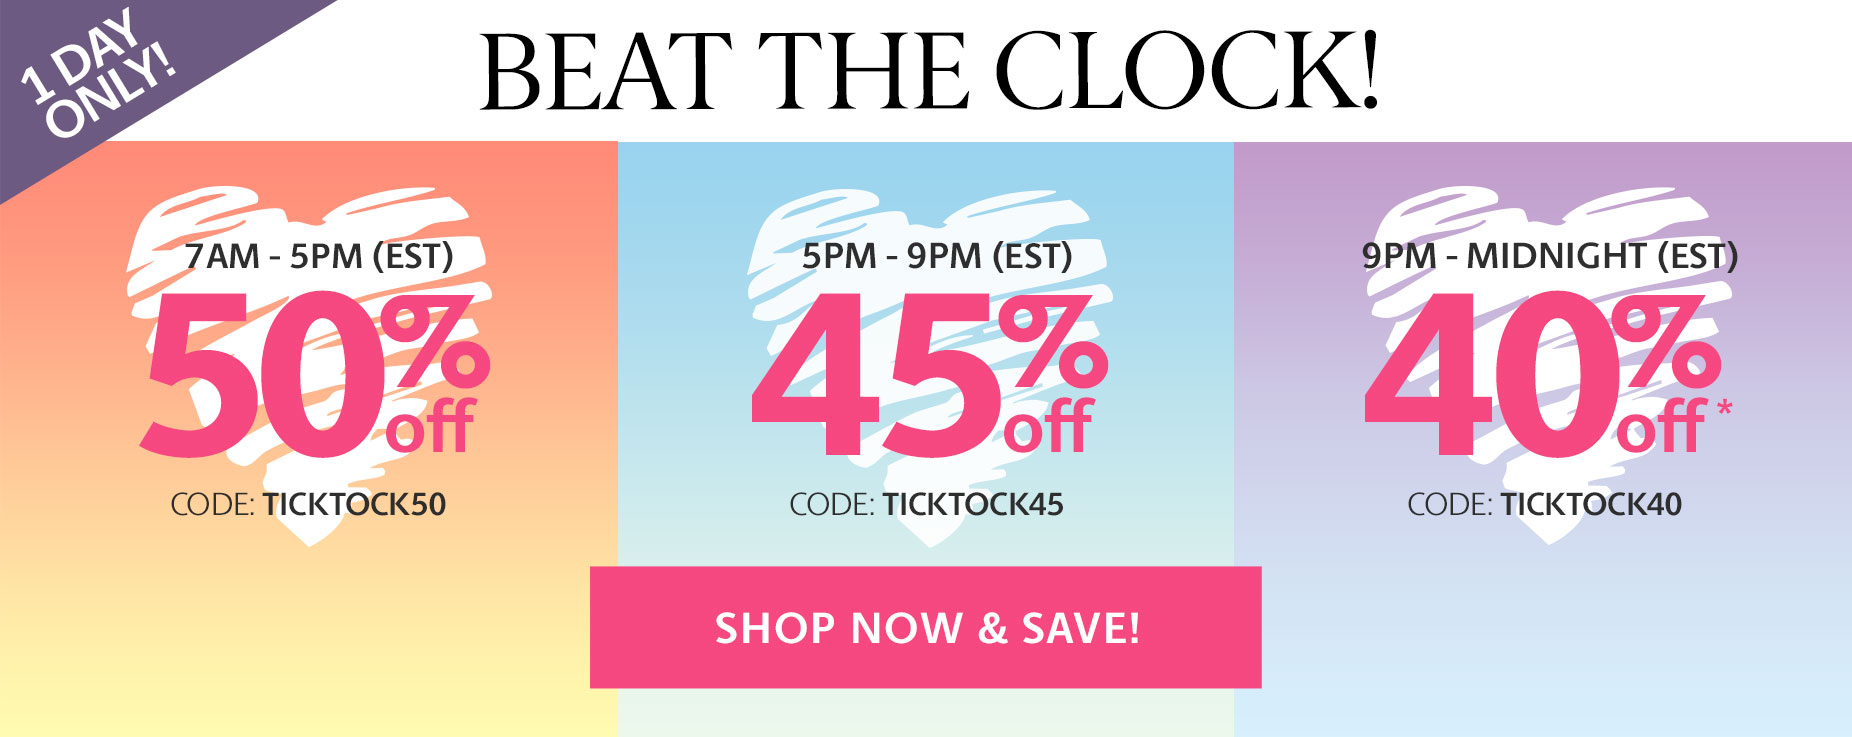 Beat The Clock - Shop Now & Save!